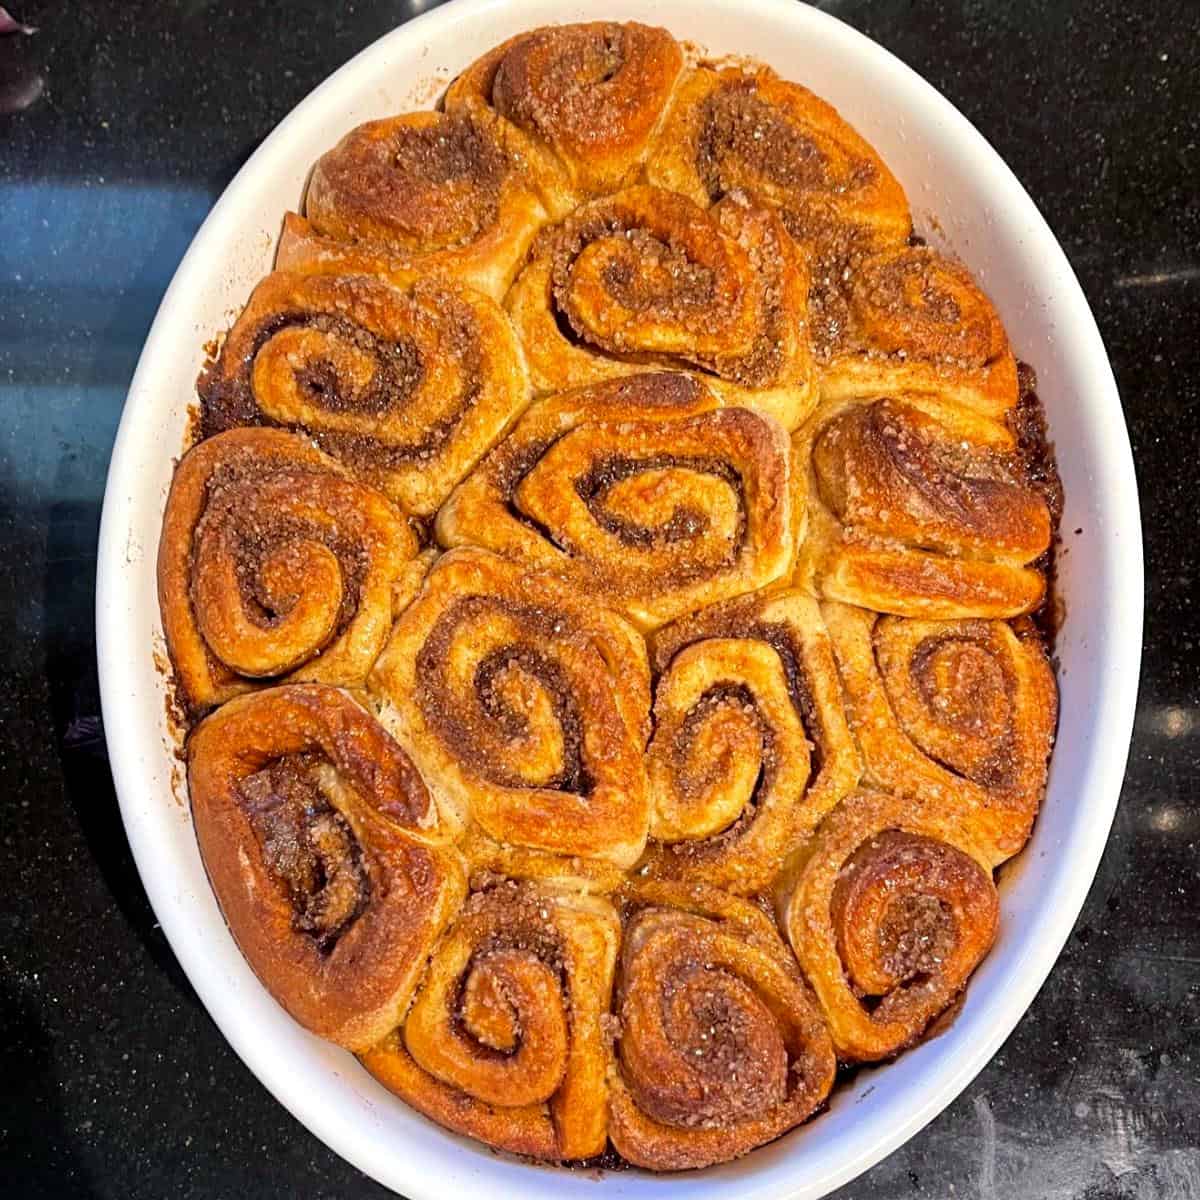 Sourdough sticky buns after baking in oval baking dish.